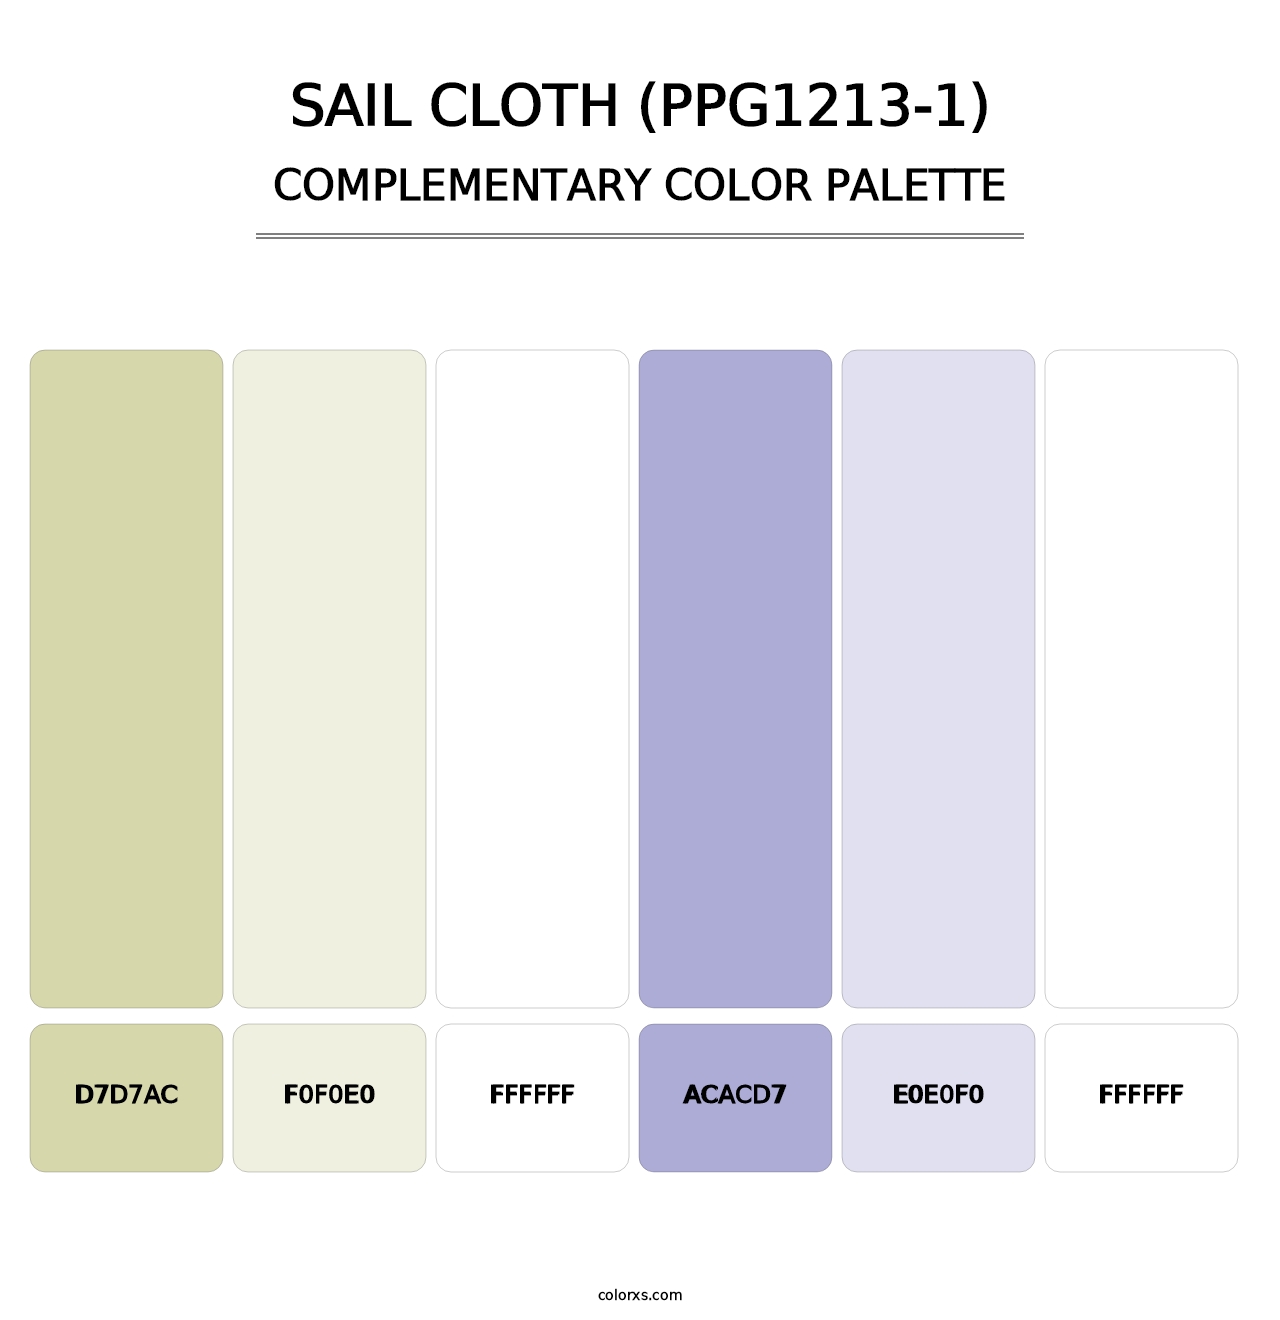 Sail Cloth (PPG1213-1) - Complementary Color Palette